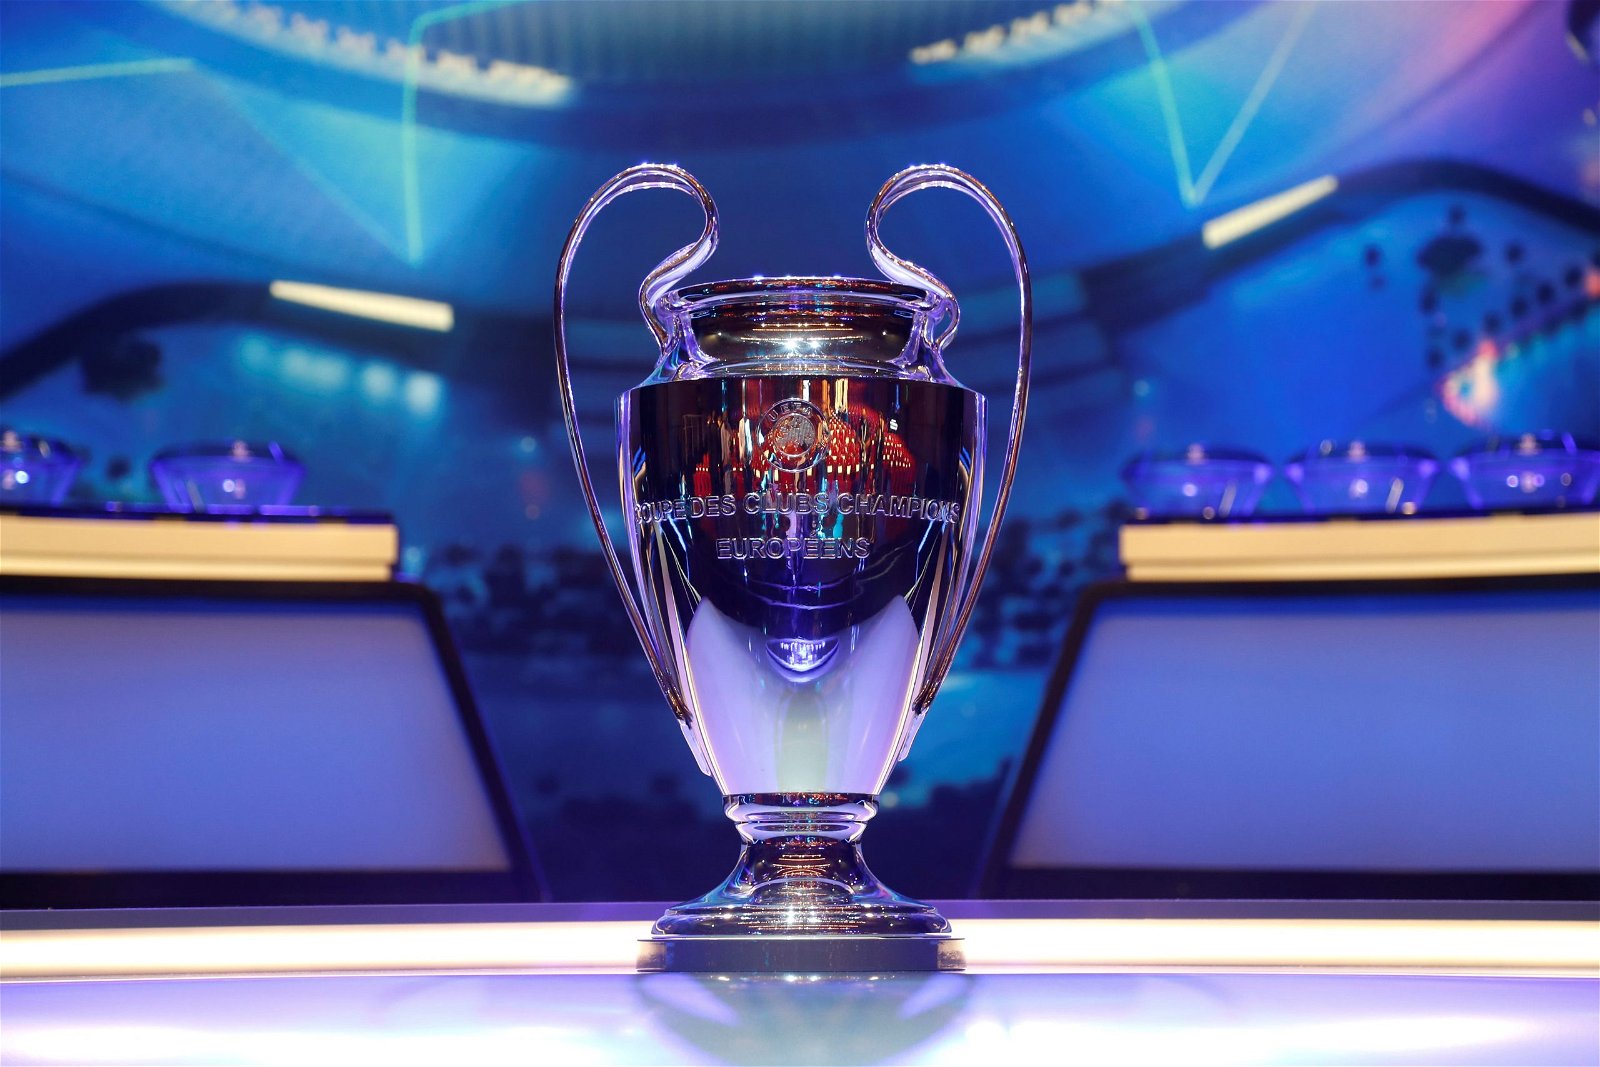 Champions League 2020: Final, Fixtures, Tables, Scores, Results, Groups, Winners and Highlights!